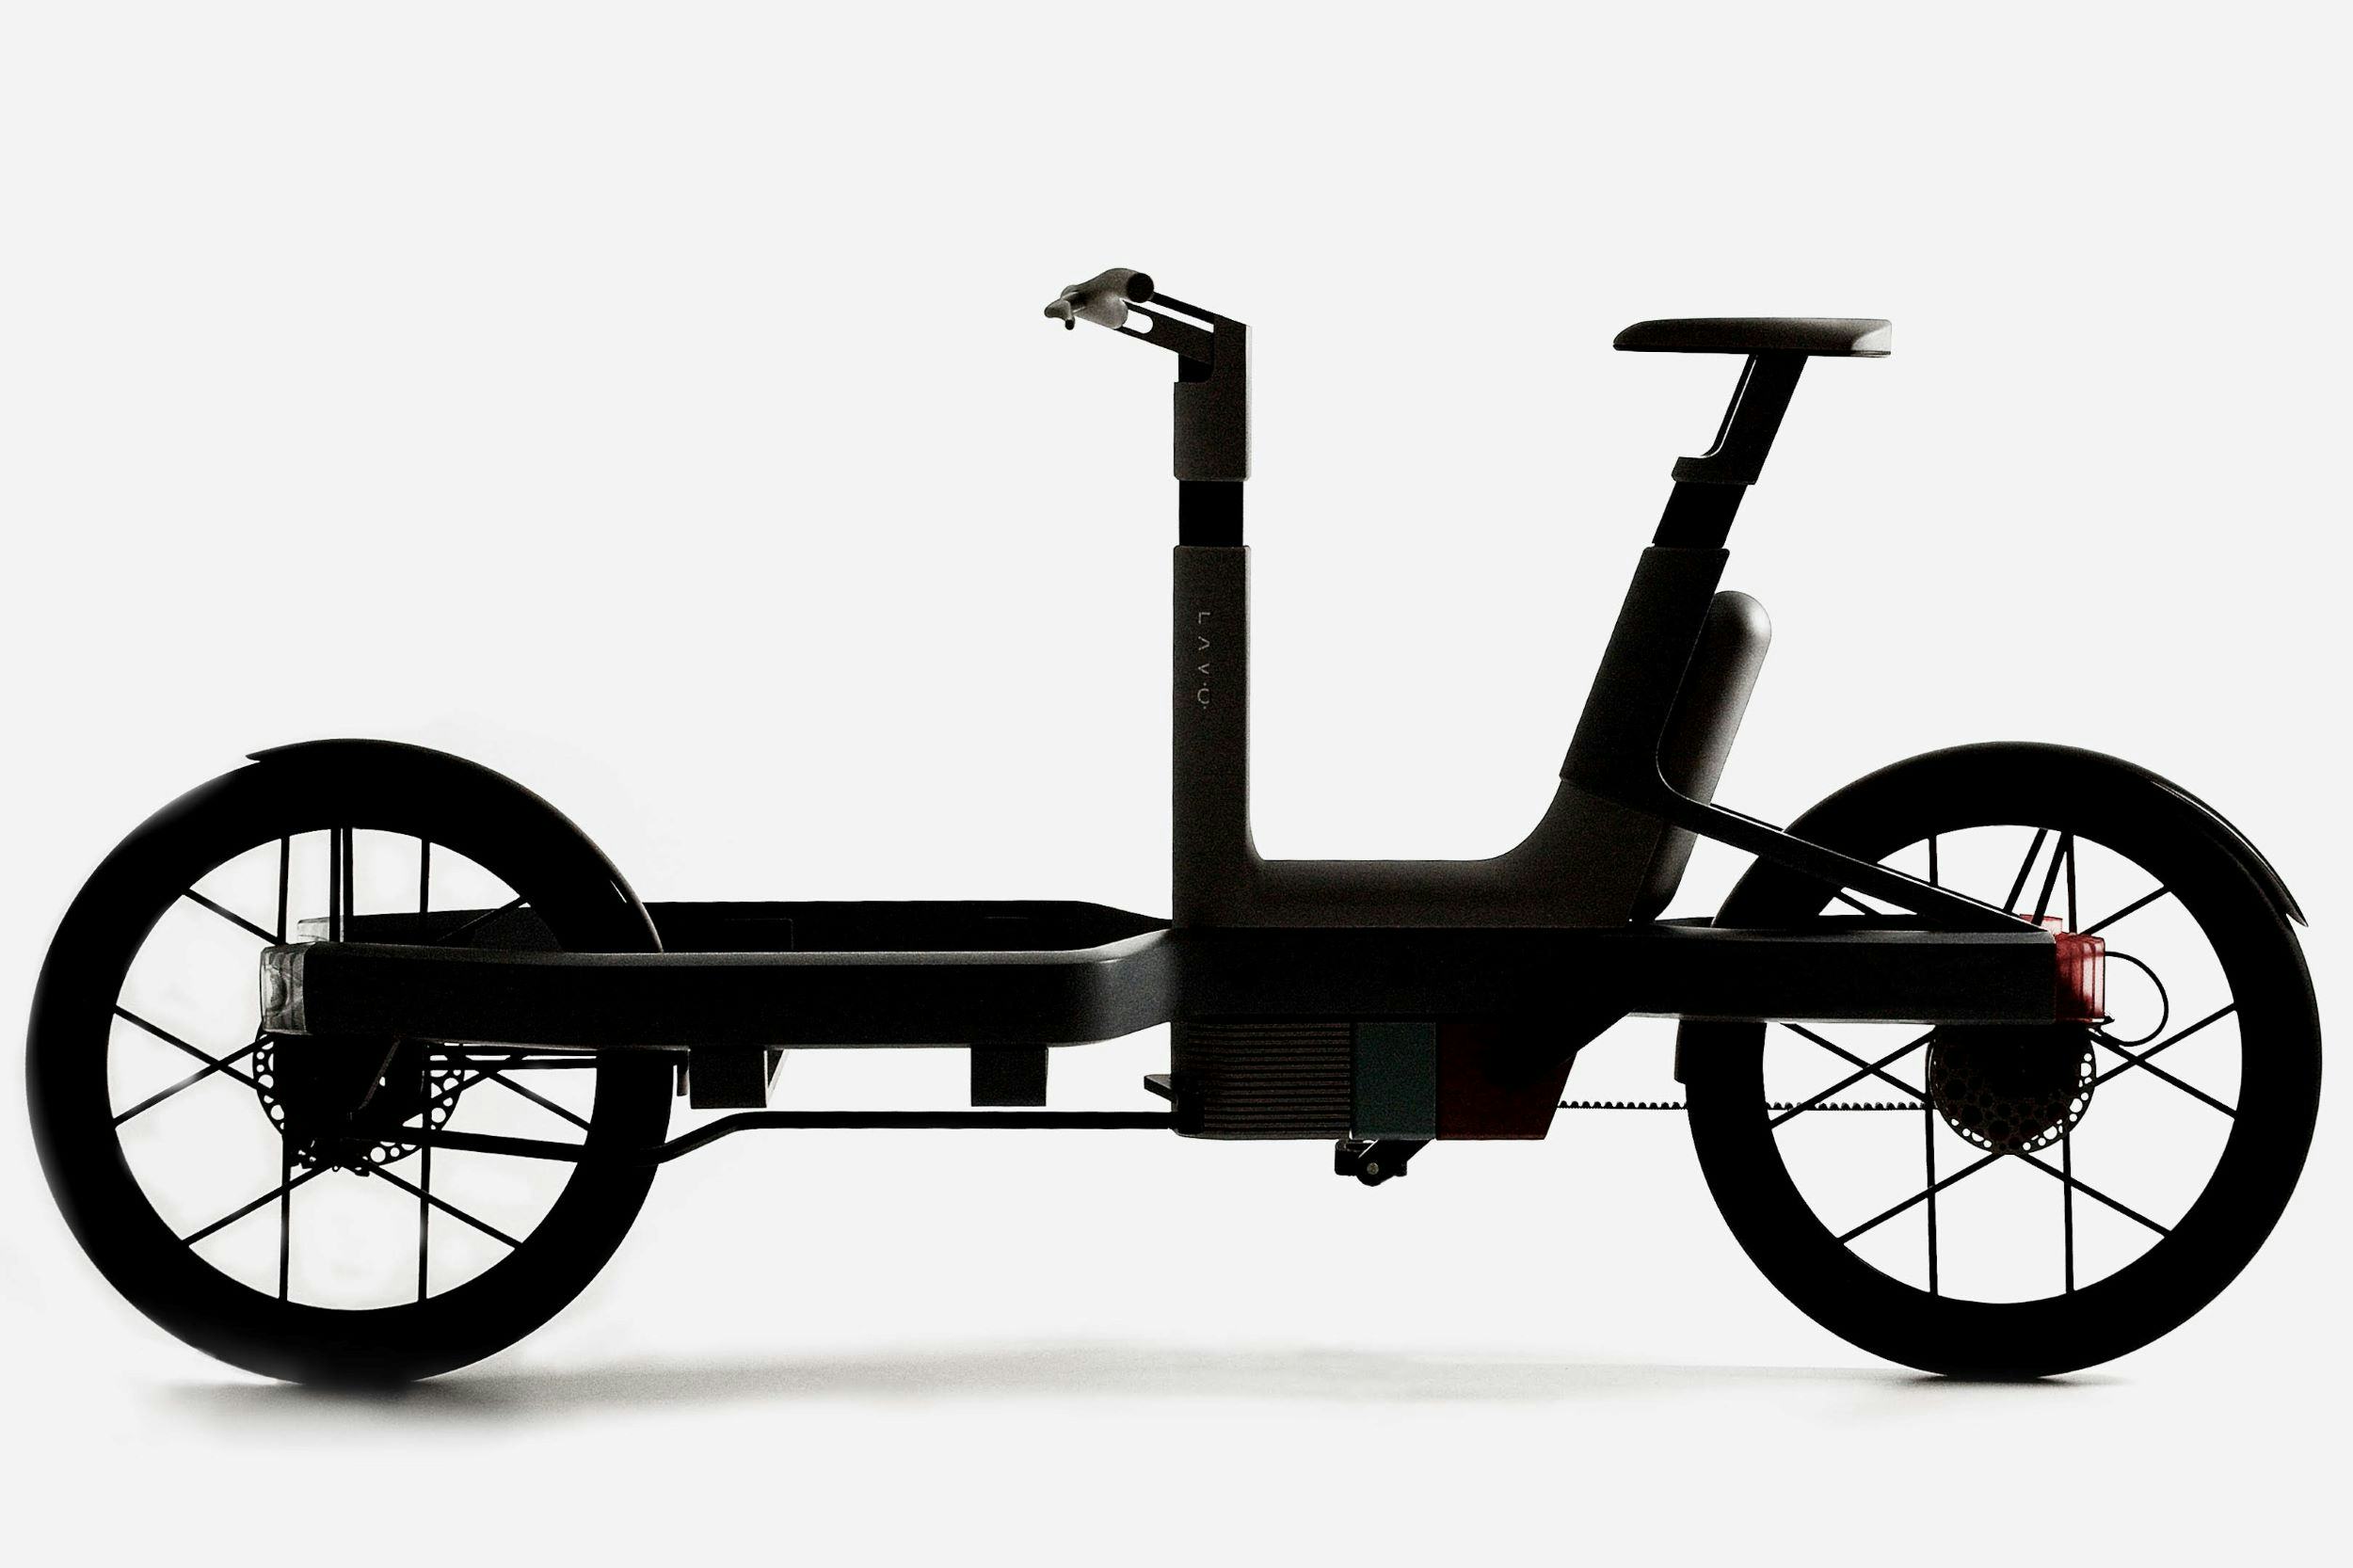 “The LAVO bike is designed as a toolbox for emission-free mobility,” the designers say. - Photo StudioMom 